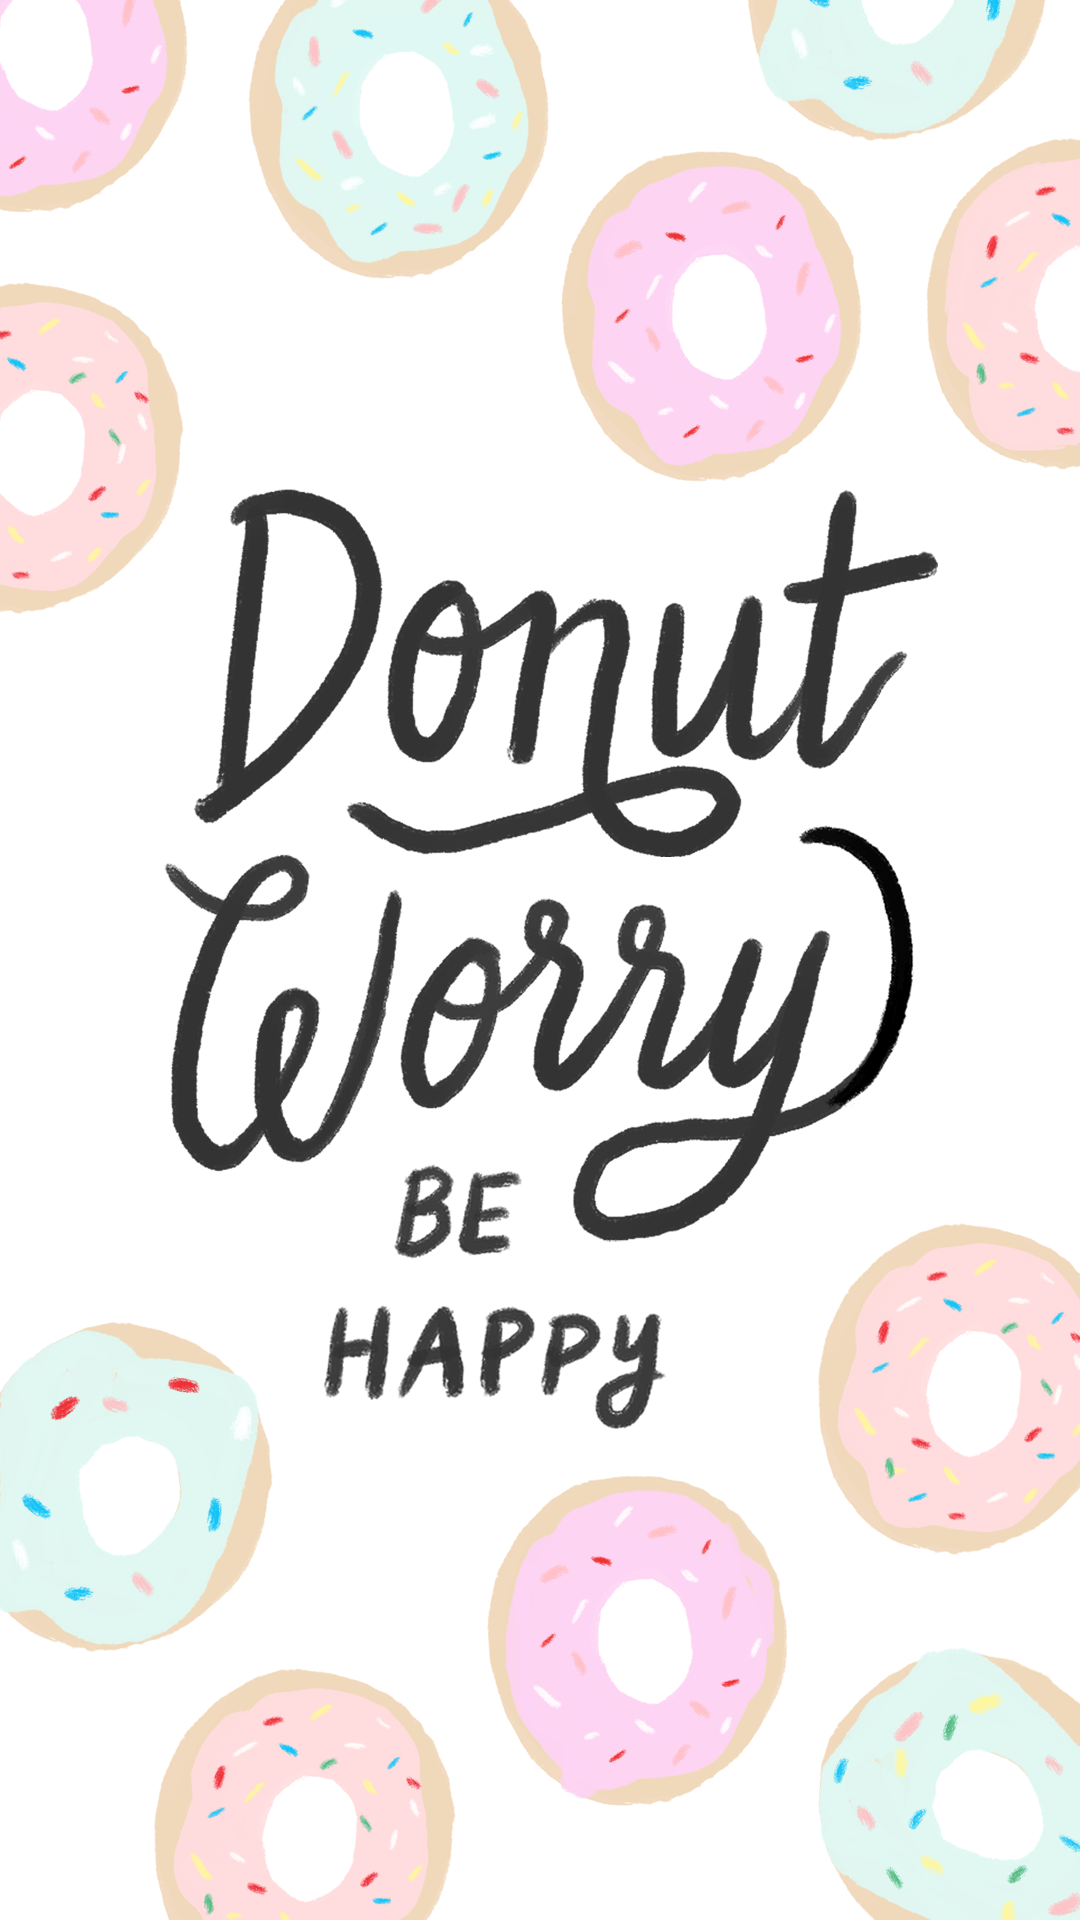 Iphone Donut Worry.png (1080×1920). Wallpaper